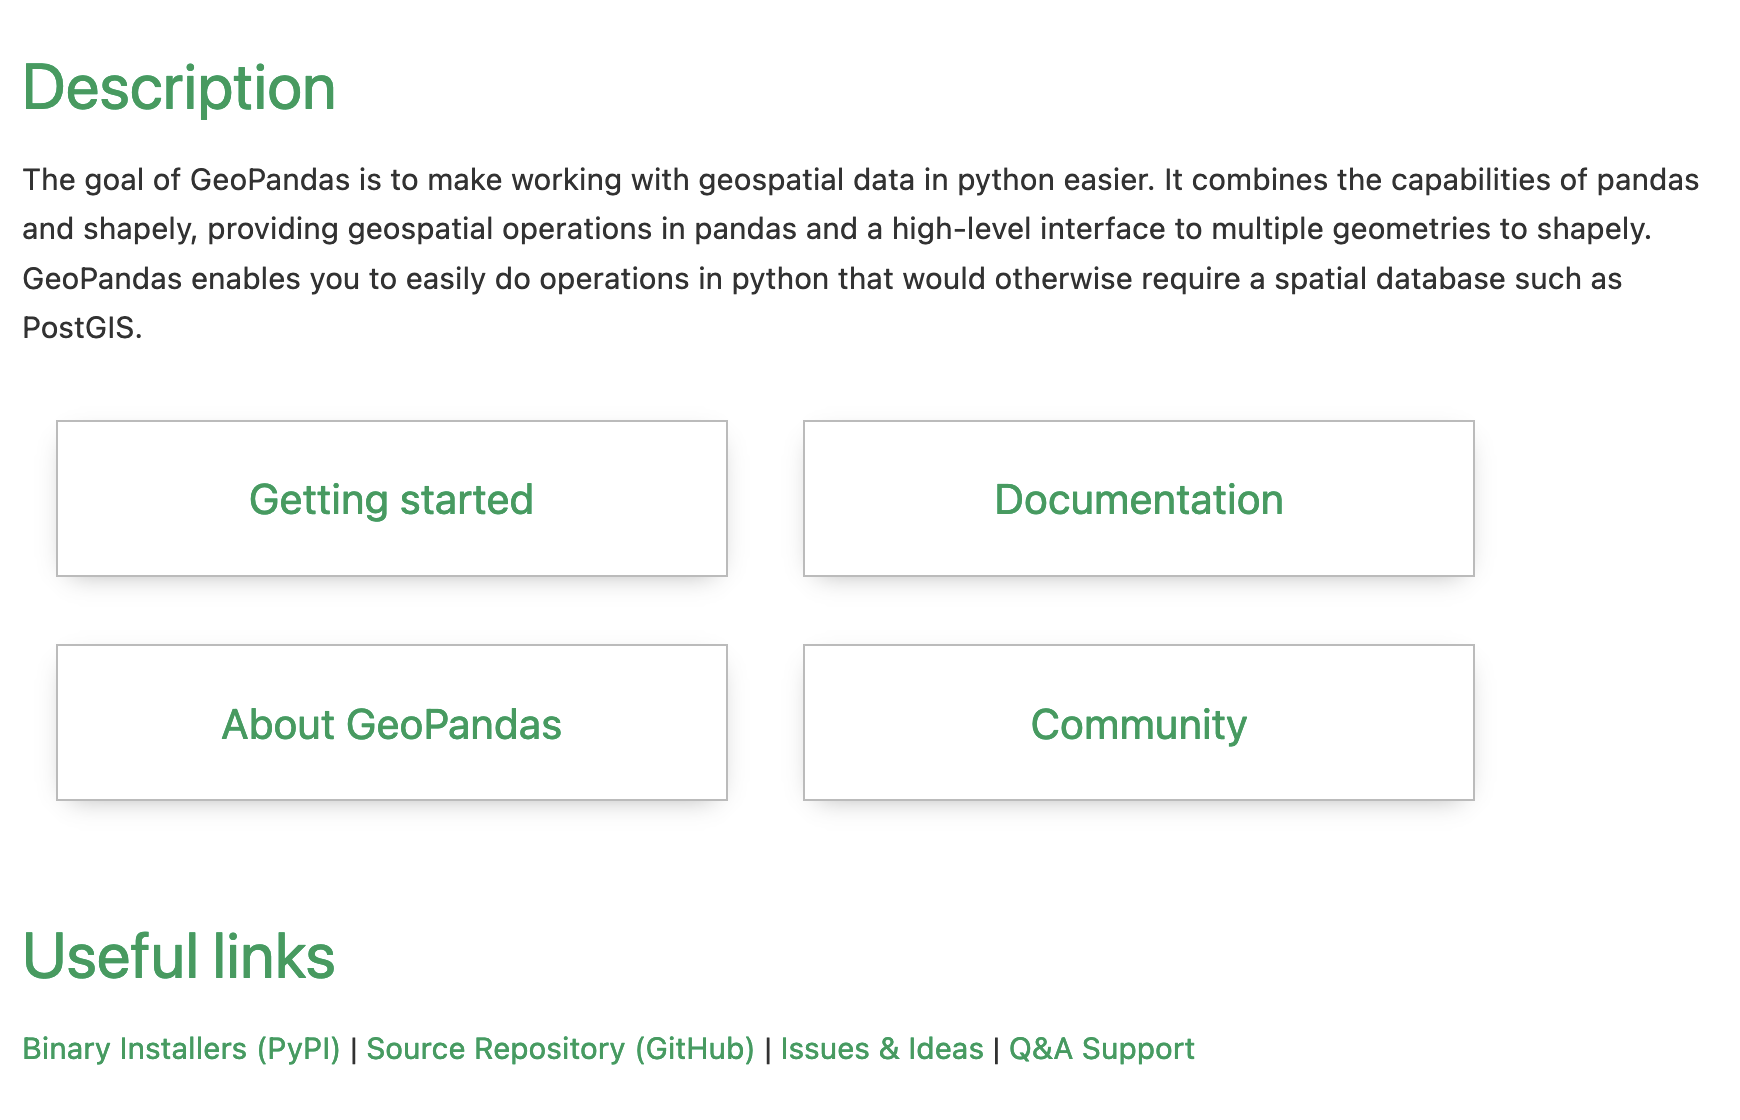 Image showing the landing page for GeoPandas documentation which has 4 sections including Getting started, Documentation, About GeoPandas, Community.